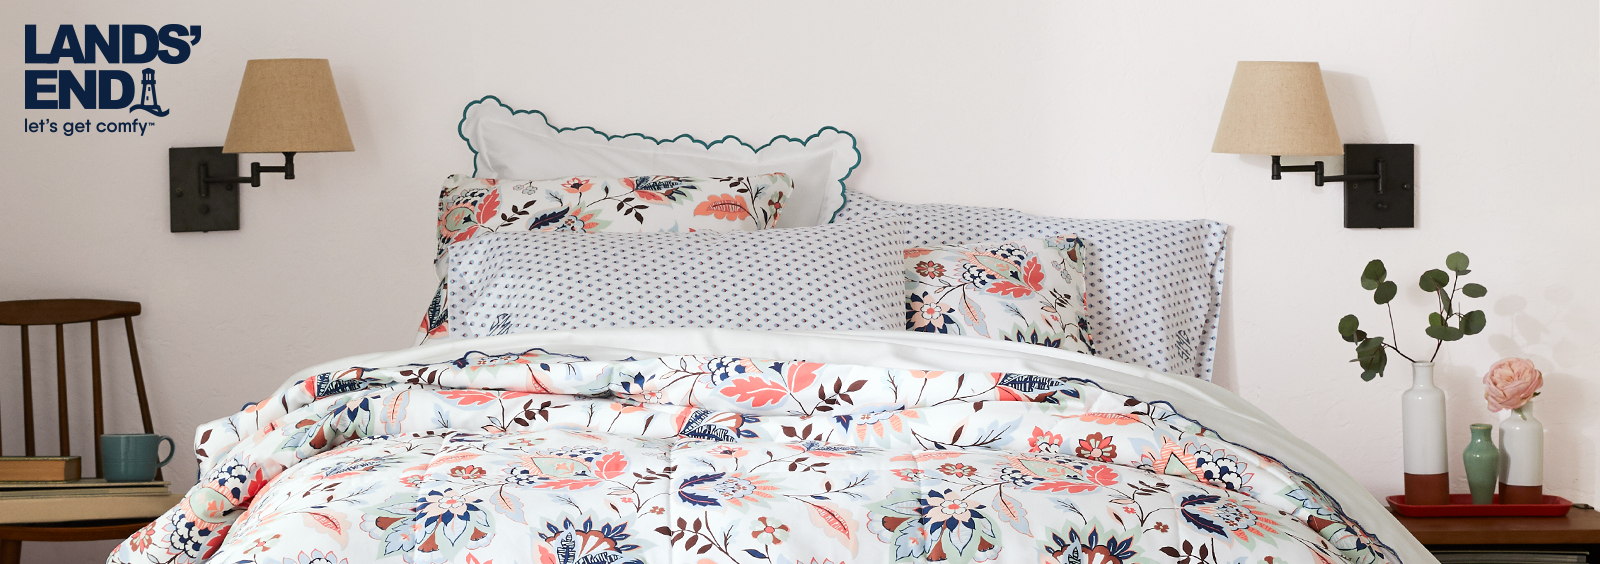 6 Ways to Make Your Bed More Comfortable